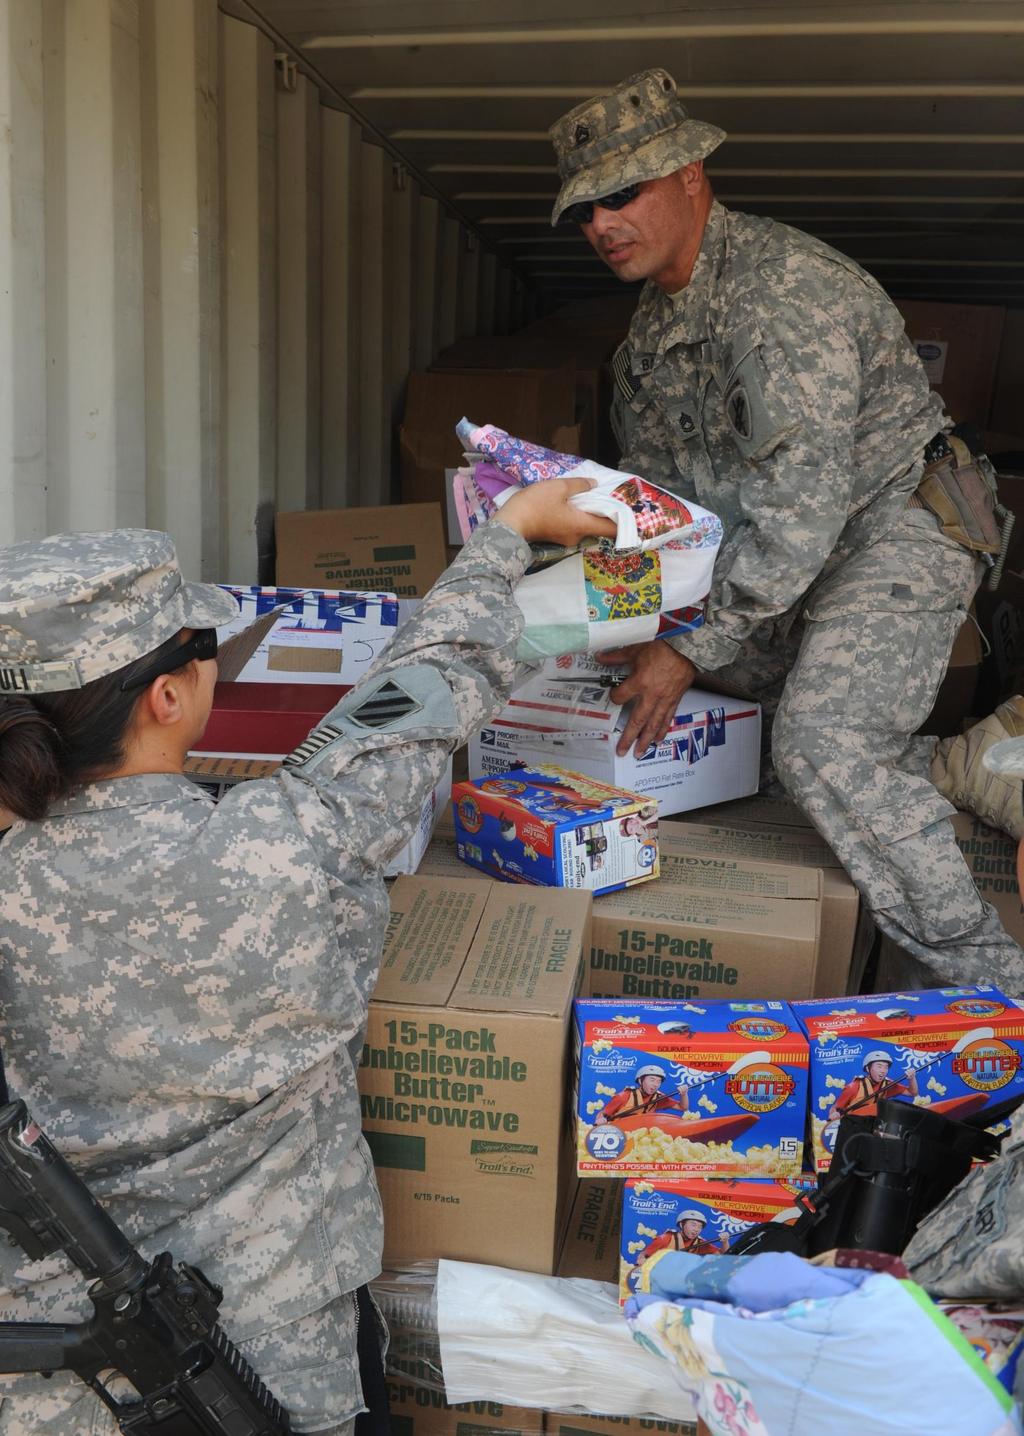 U.S. Army Photo by Spc. Gary Silverman/Released U.S. Army Sgt. 1st Class Leopoldo Banda with 486th Civil Affairs Battalion distributes treats to U.S. Soldiers with 4th Advise and Assist Brigade, 3rd Infantry Division in Camp Ramadi, Iraq, September 9, 2010.